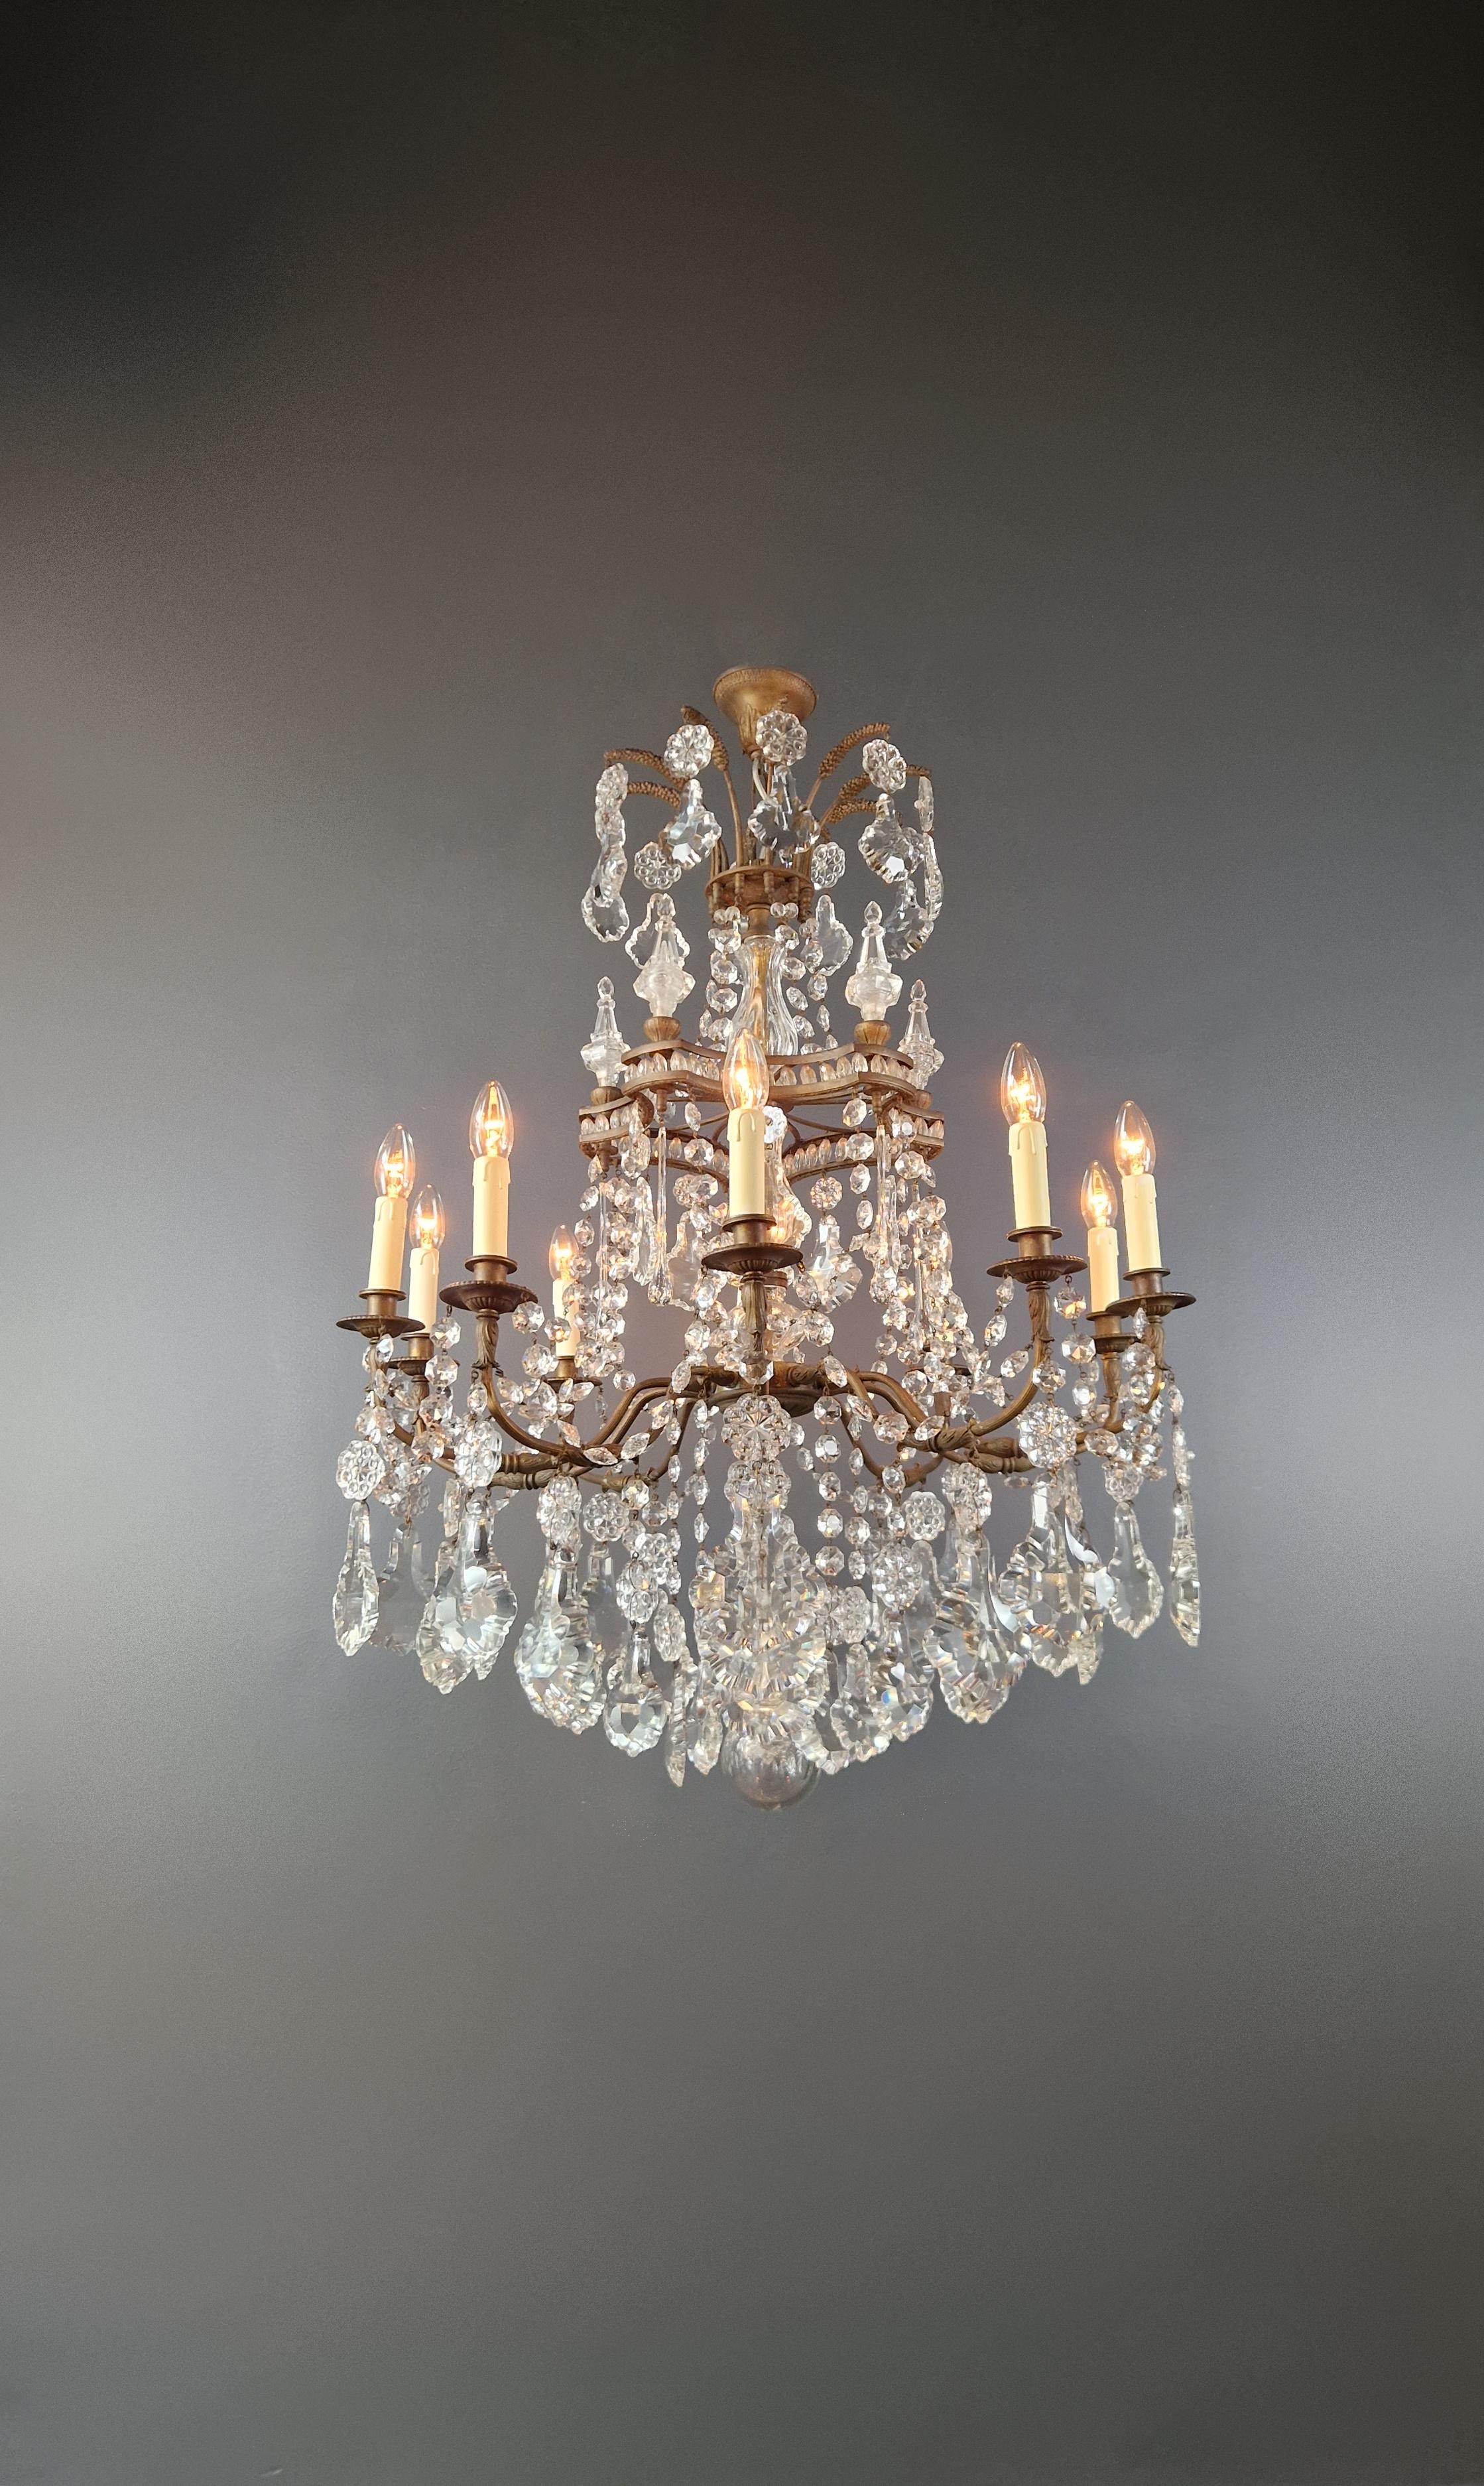 Italian Art Nouveau Crystal Chandelier Brass Large Crystals Traditional Antique Ceiling For Sale